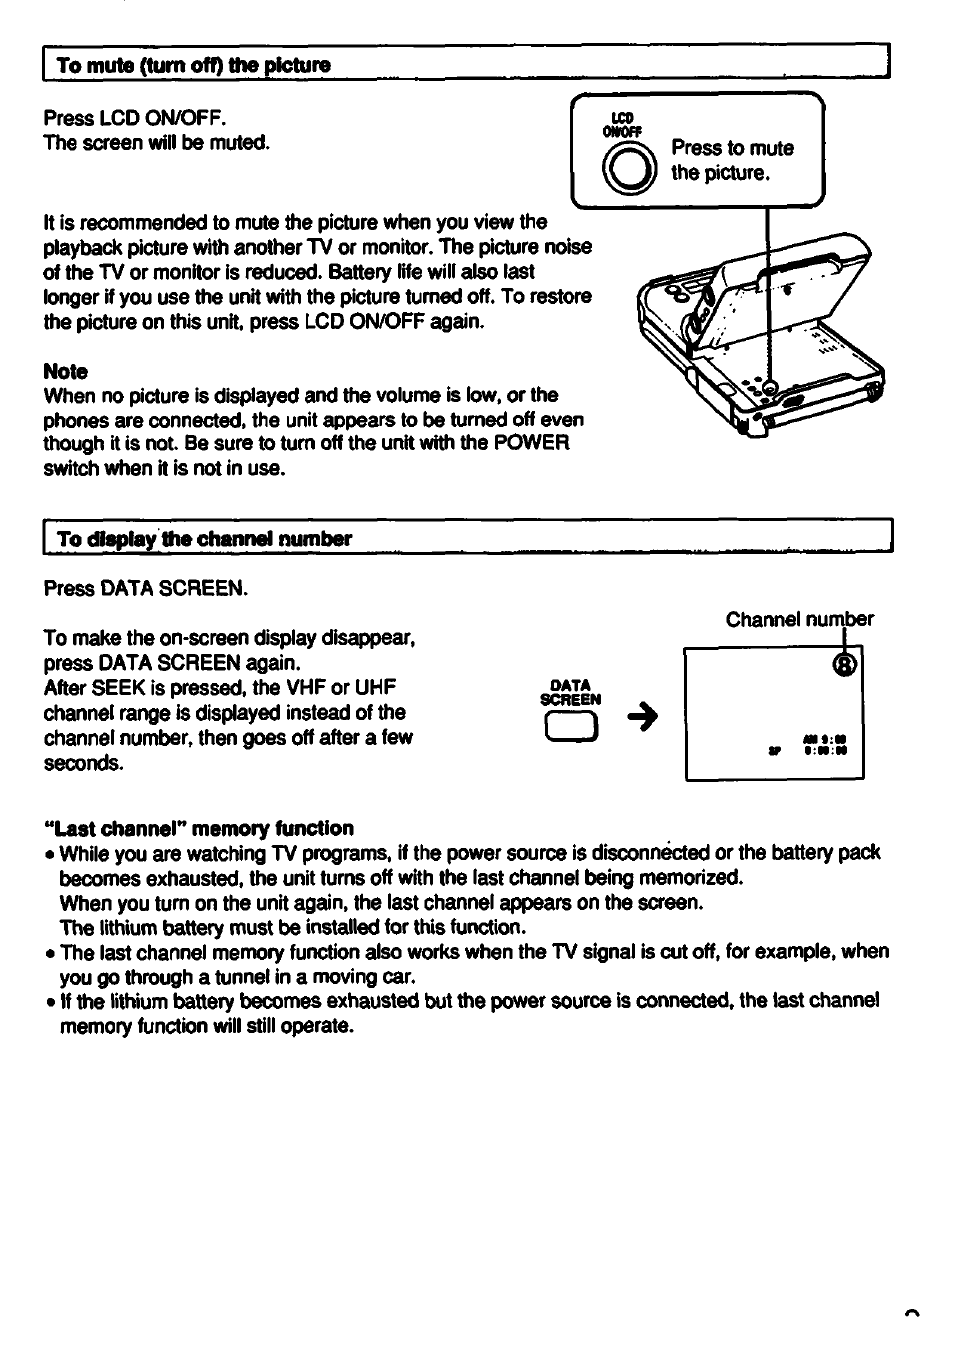 To display the channel number | Sony GV-500 User Manual | Page 29 / 84